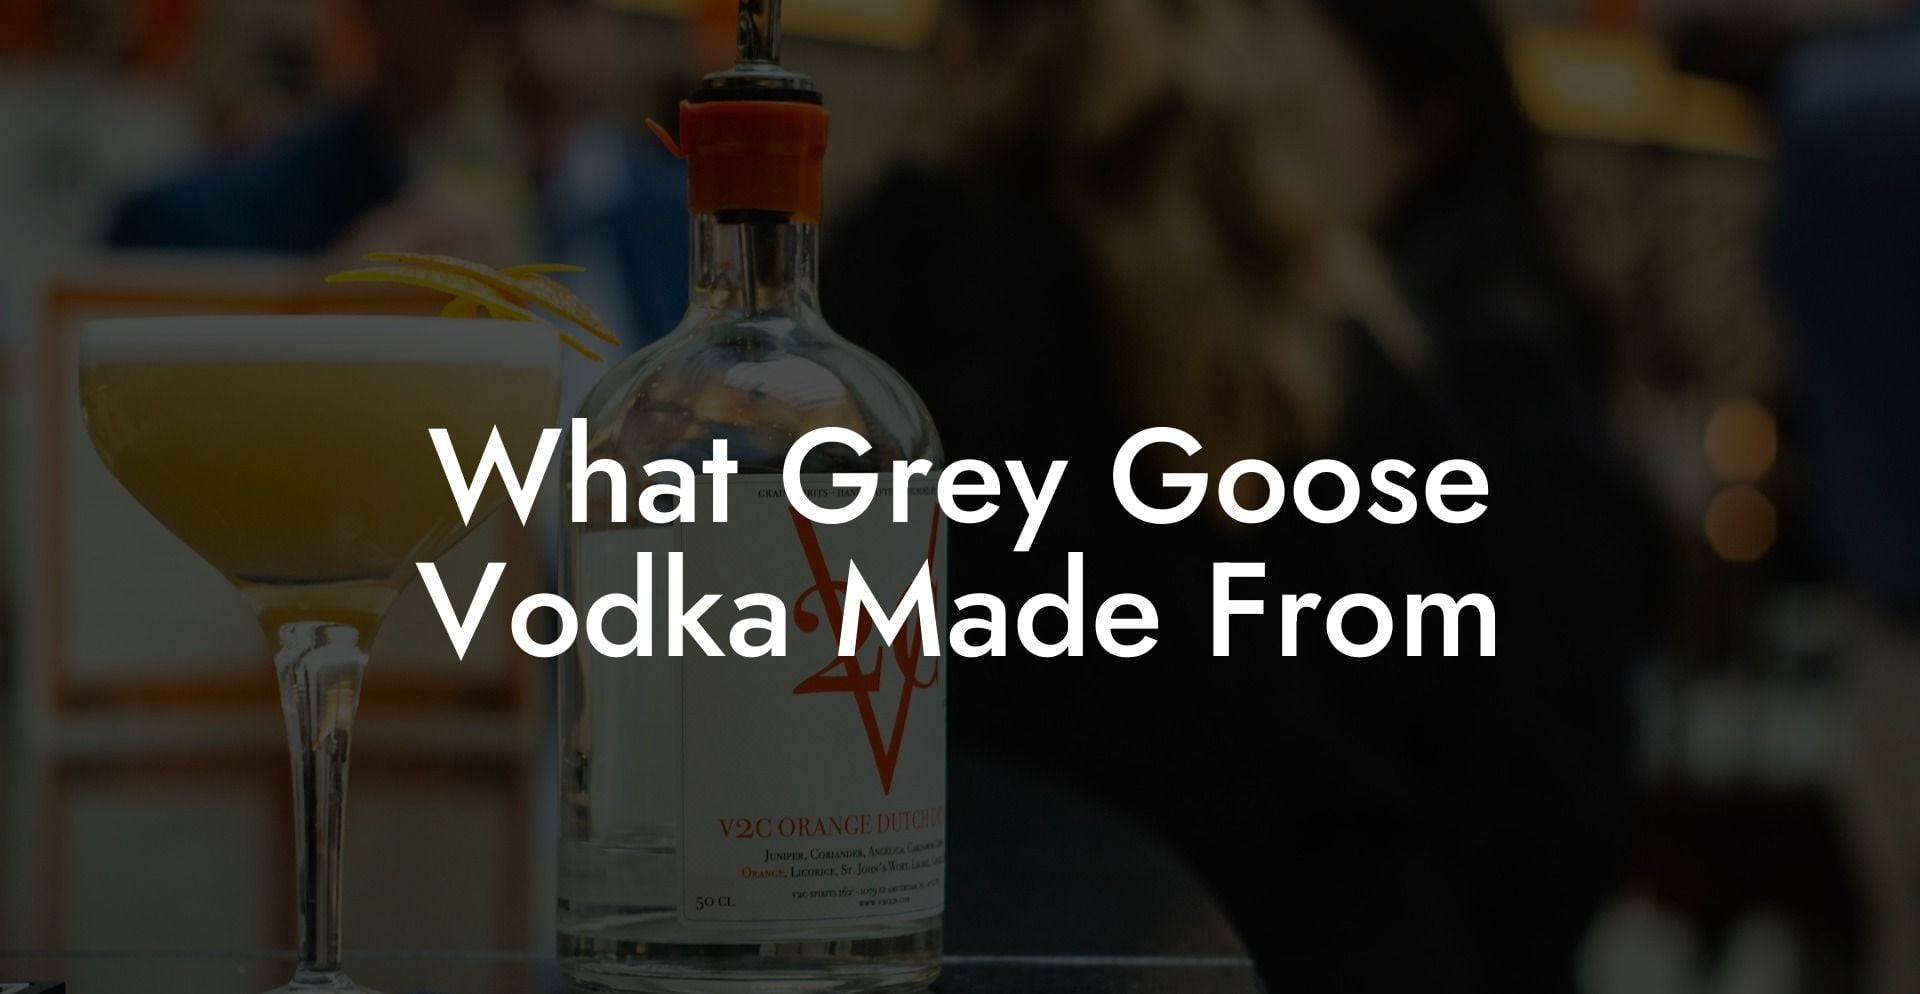 What Grey Goose Vodka Made From